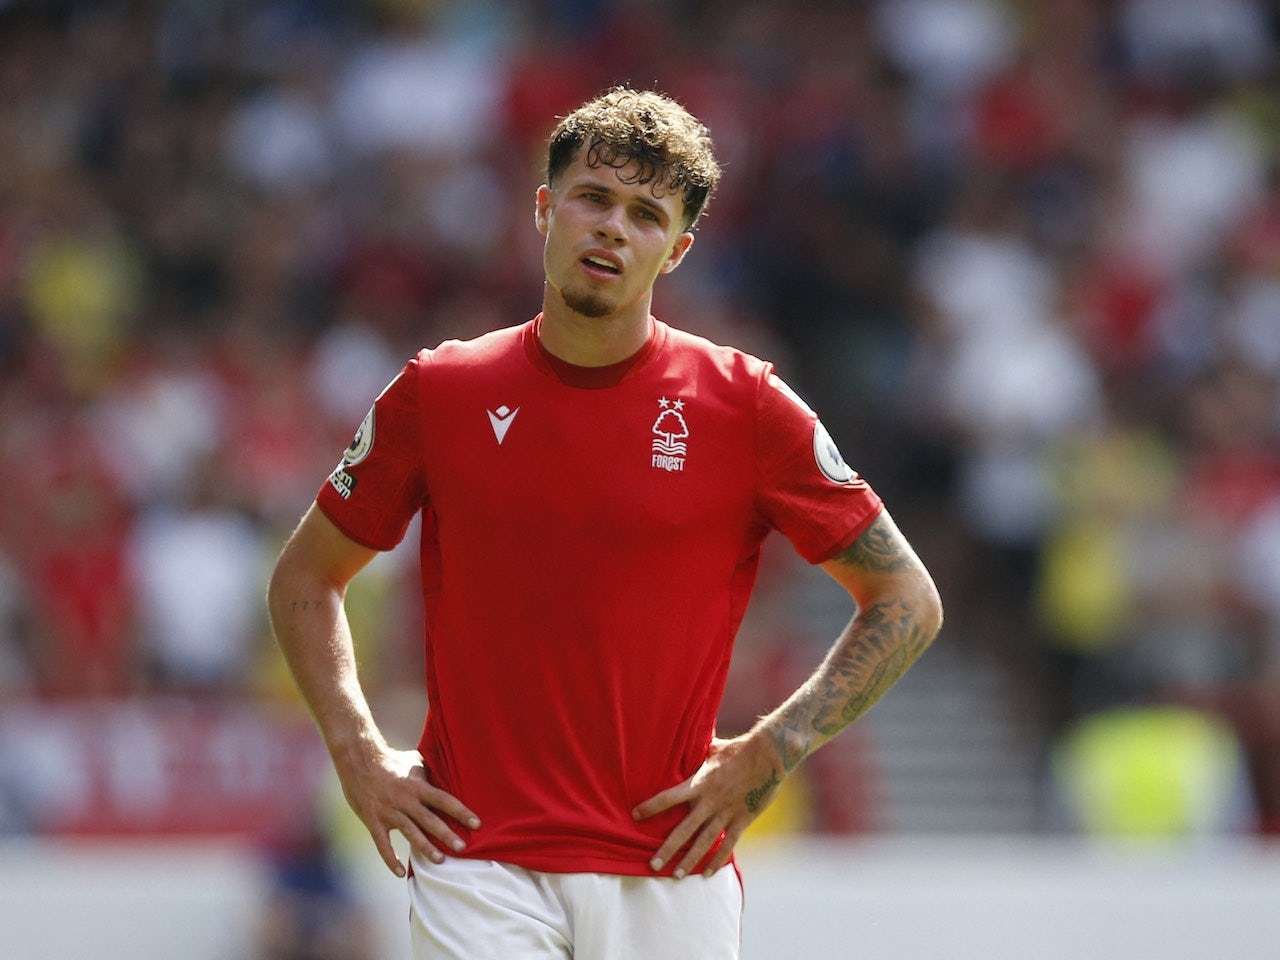 Nottingham Forest's Neco Williams ruled out for rest of season - Sports Mole